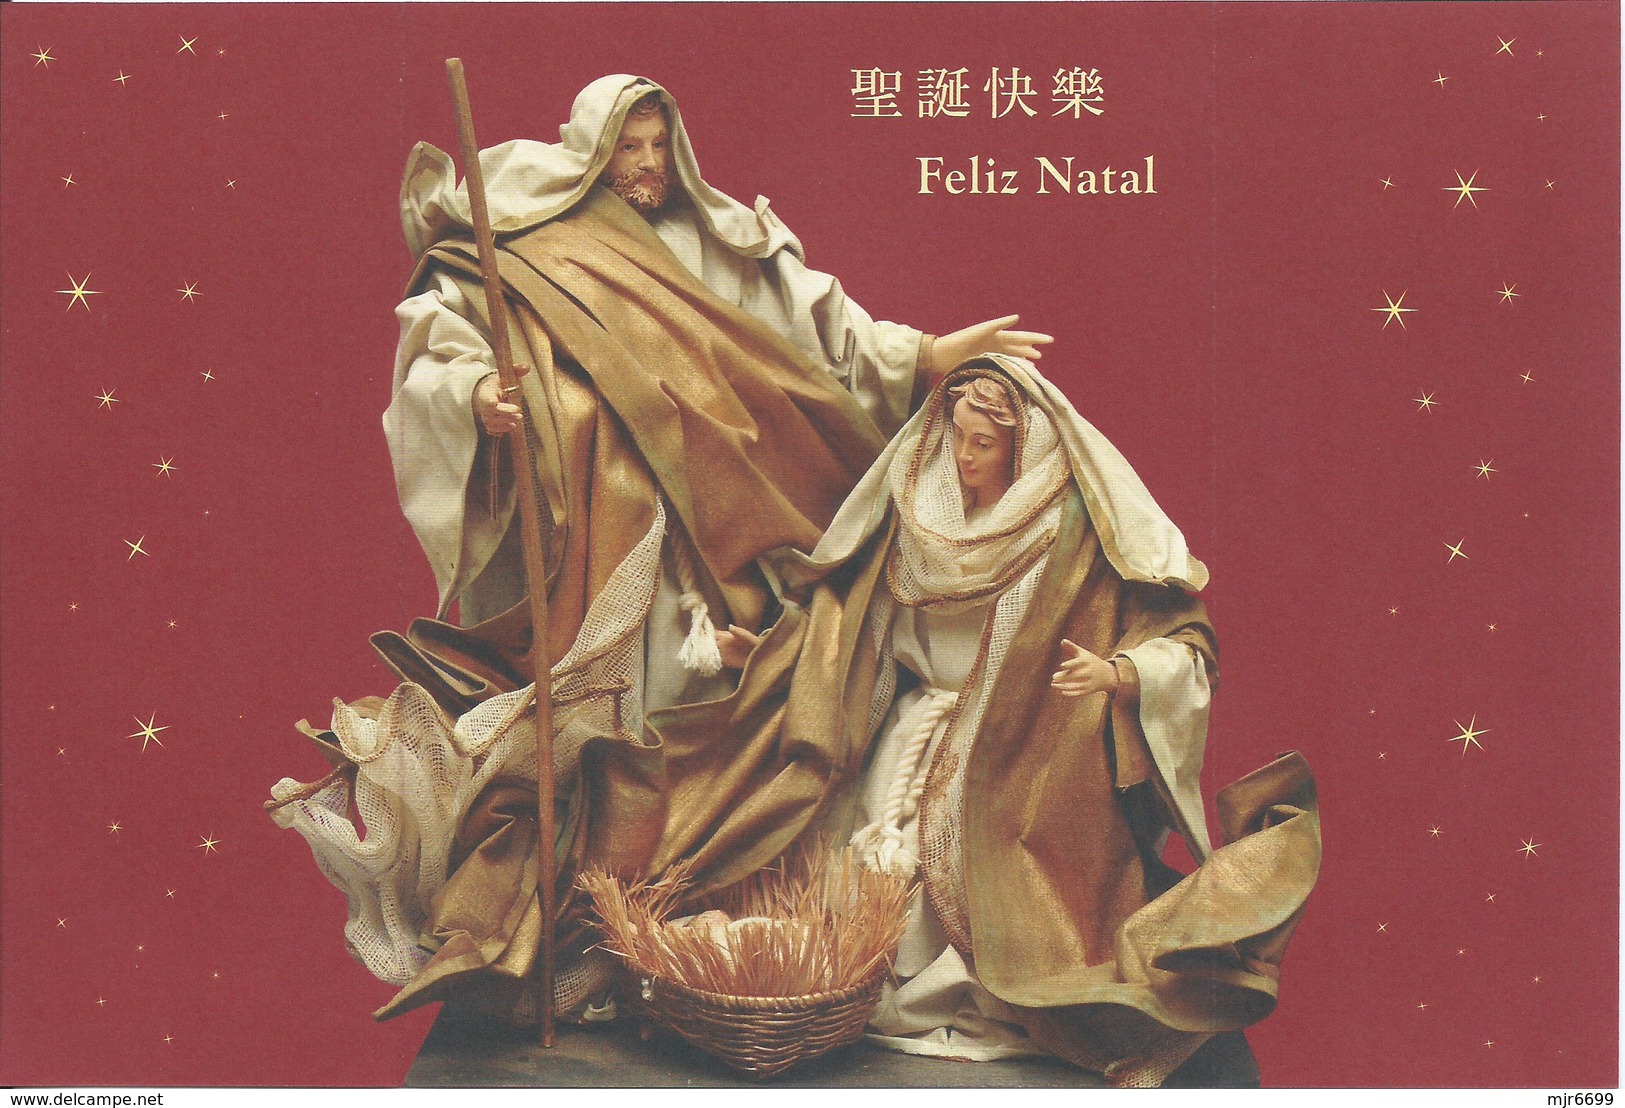 MACAU 2009 CHRISTMAS GREETING CARD & POSTAGE PAID COVER FIRST DAY USAGE WITH TERMINAL POST CDS - Ganzsachen